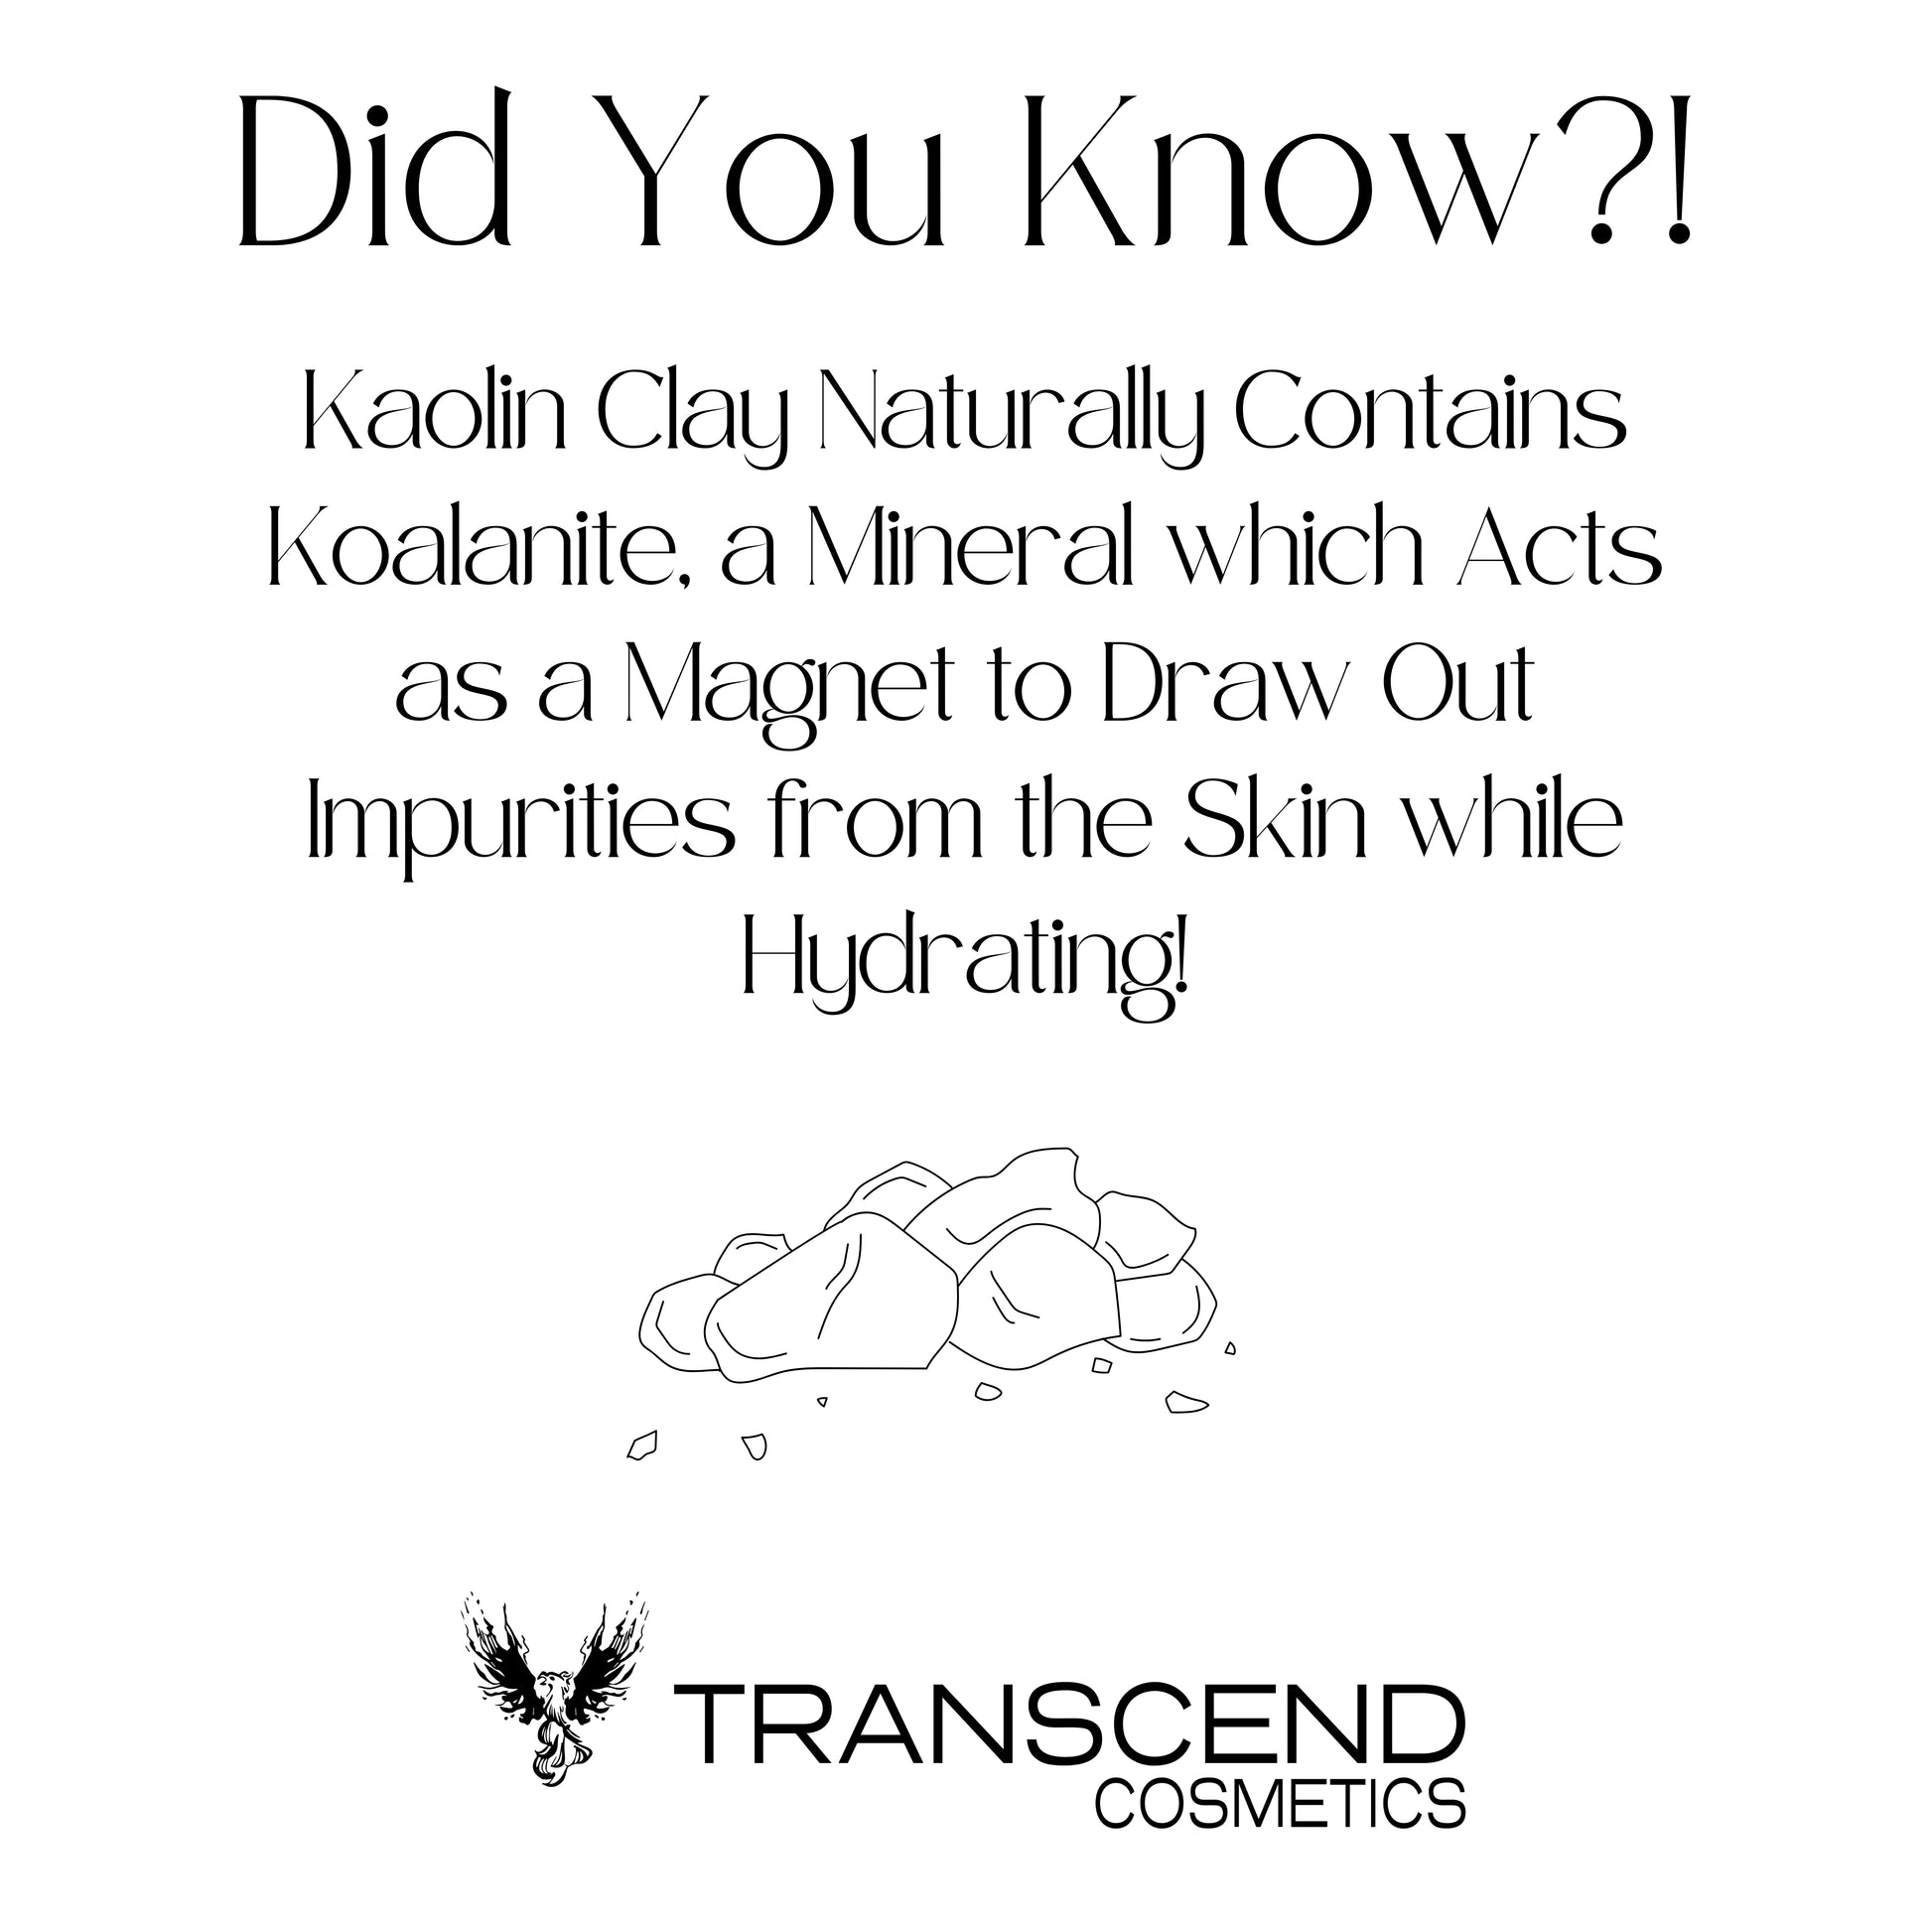 The image features an informative graphic titled "Did You Know?!" highlighting the properties of kaolin clay in skincare. It explains that kaolin clay naturally contains kaolinite, a mineral that acts like a magnet to draw out impurities from the skin while also hydrating. An illustration of a small pile of kaolin clay accompanies the text, emphasizing its cleansing benefits. The Transcend Cosmetics logo is displayed at the bottom of the graphic.
